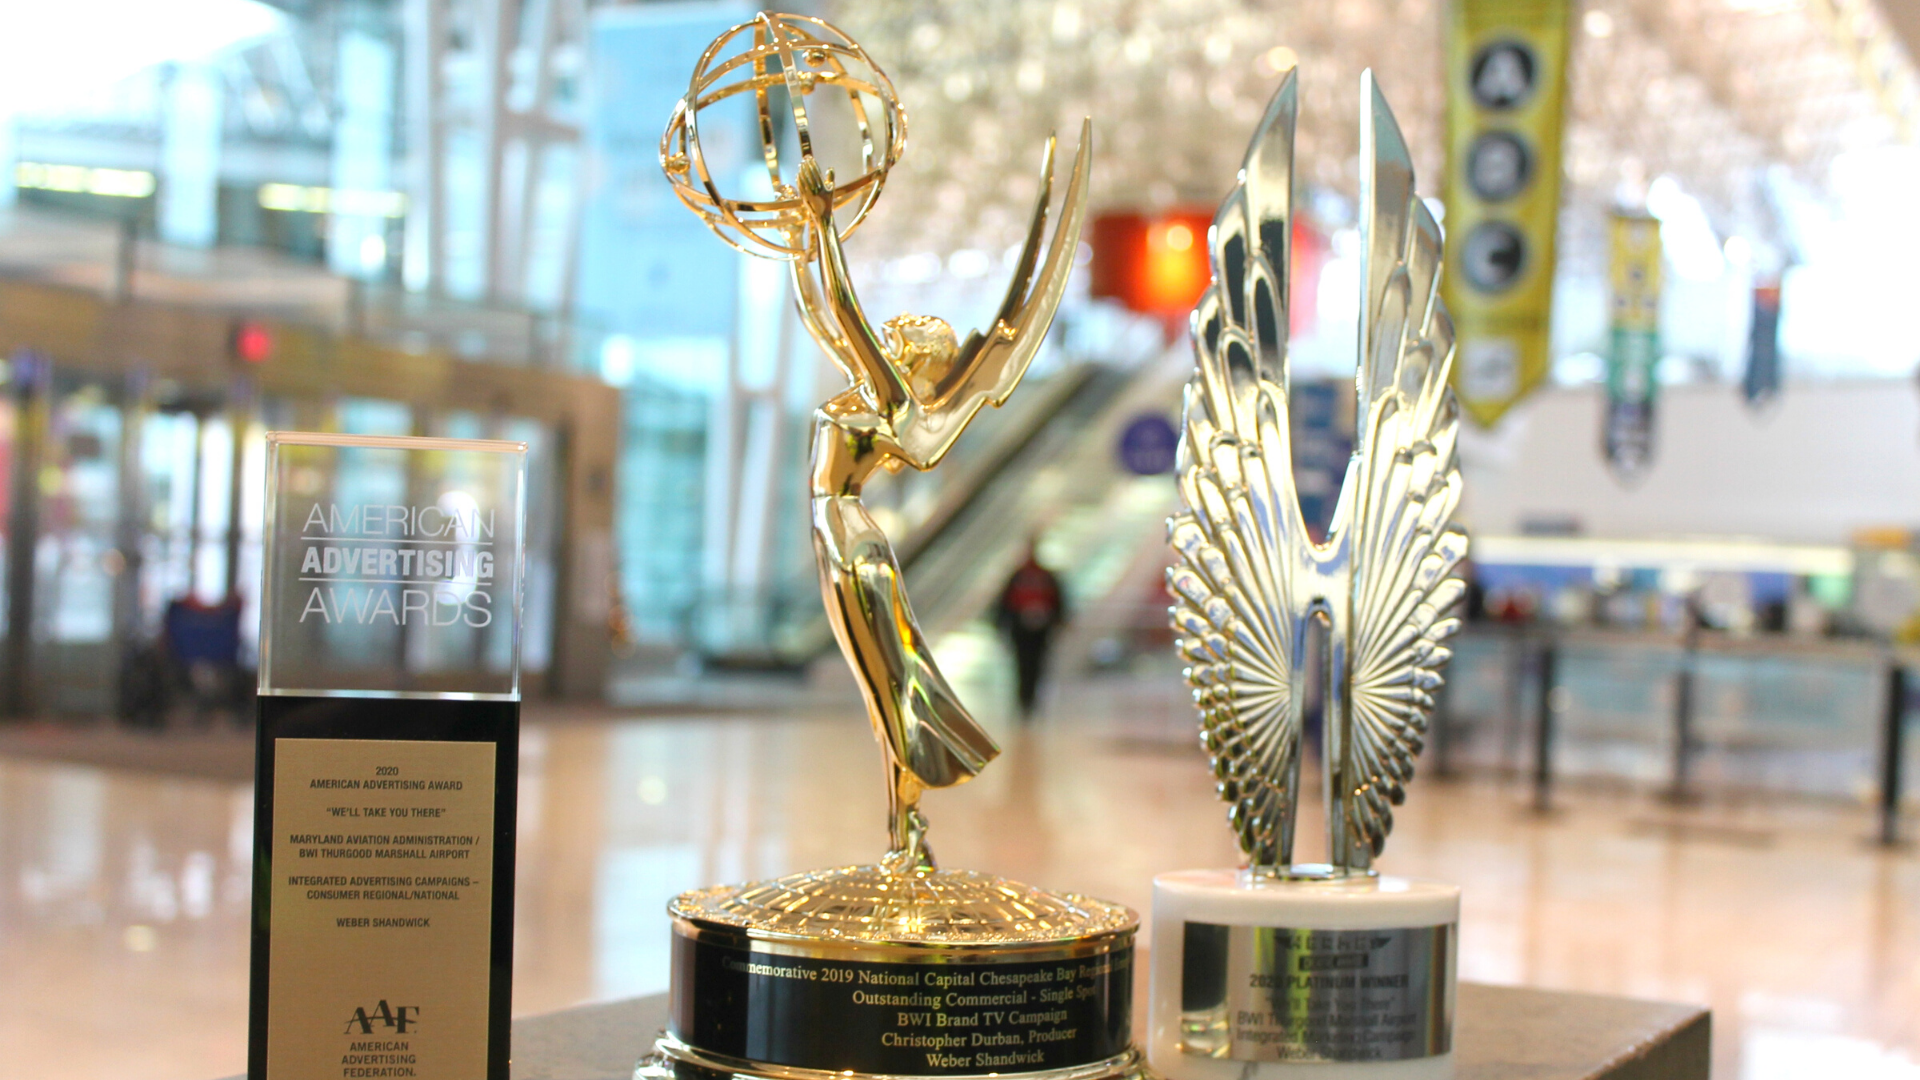 Photograph of three marketing awards received in 2020 by BWI Marshall Airport